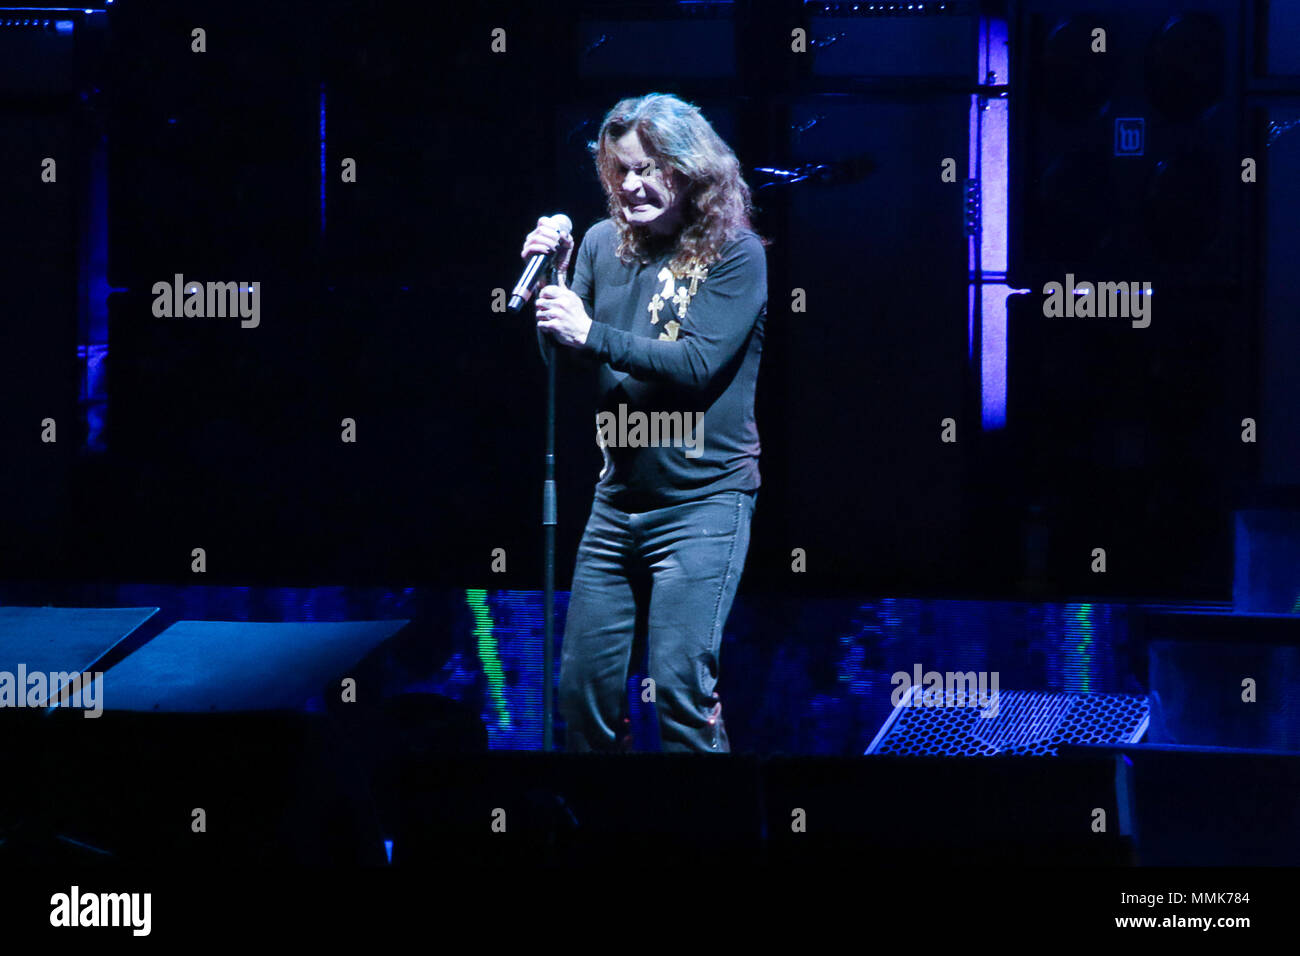 Buenos Aires, Argentina. 12th May 2018.  Ozzy Osbourne on stage during the show of 'No more tours 2' this friday night on Obras Sanitarias de Buenos Aires Stadium, Argentina. (Photo: Néstor J. Beremblum / Alamy News) Credit: Néstor J. Beremblum/Alamy Live News Stock Photo